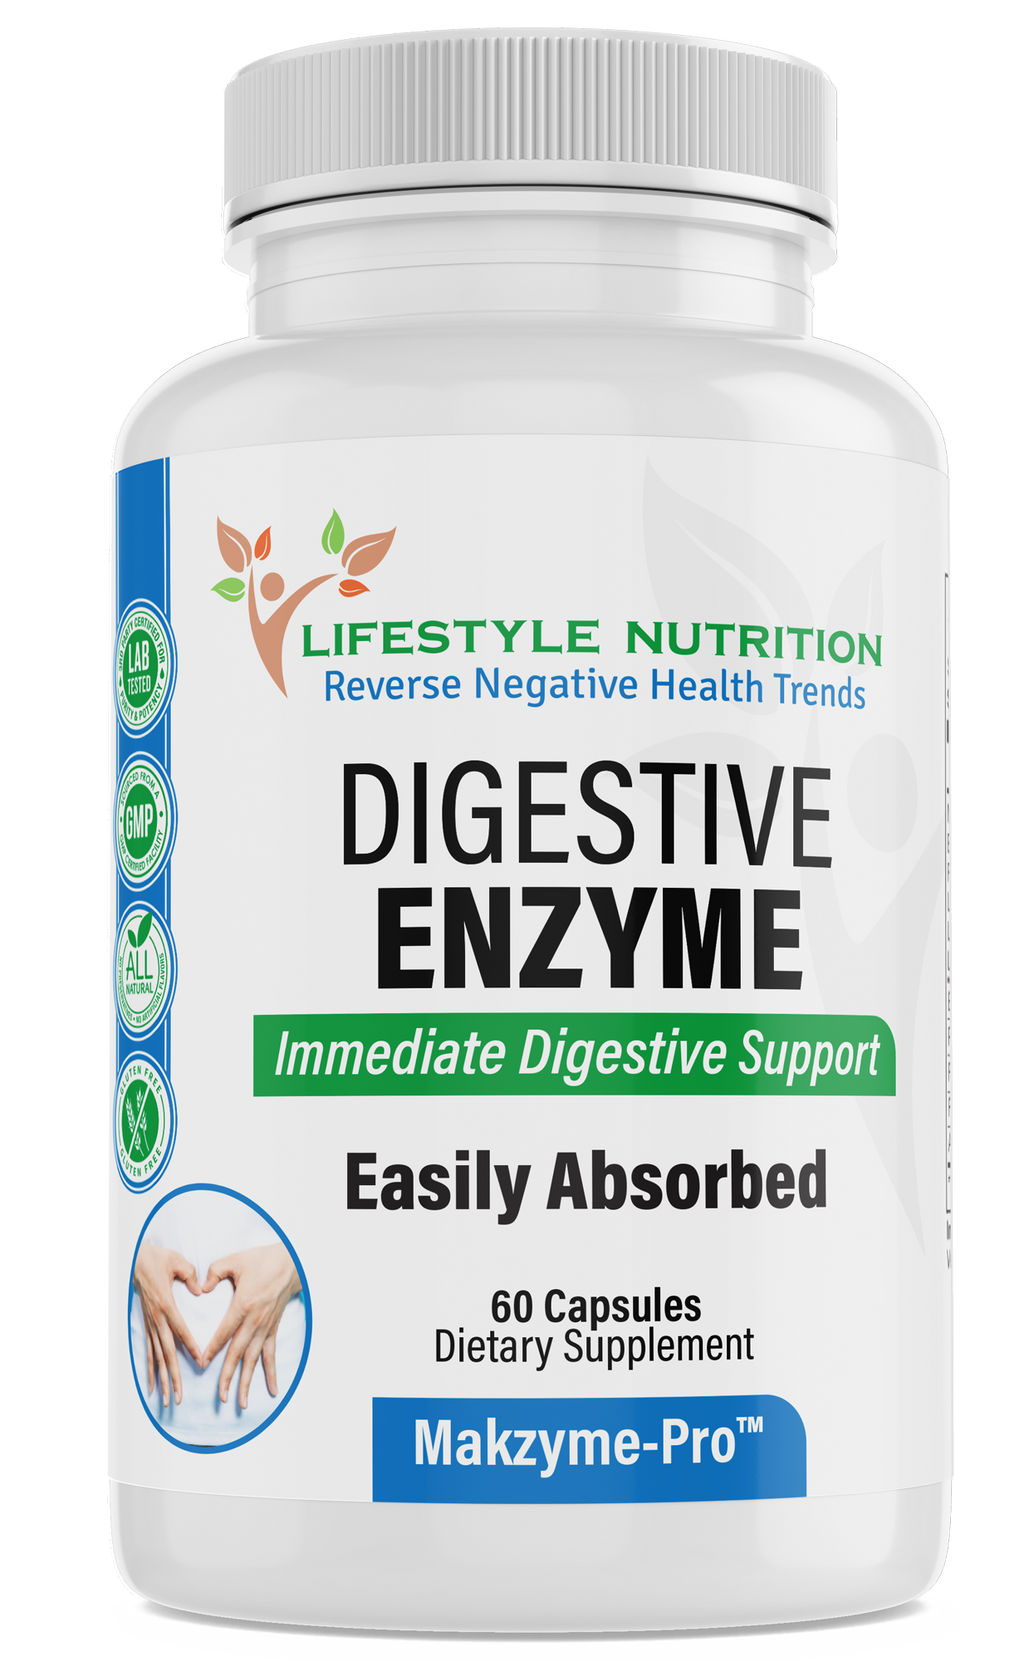 Digestive enzyme support